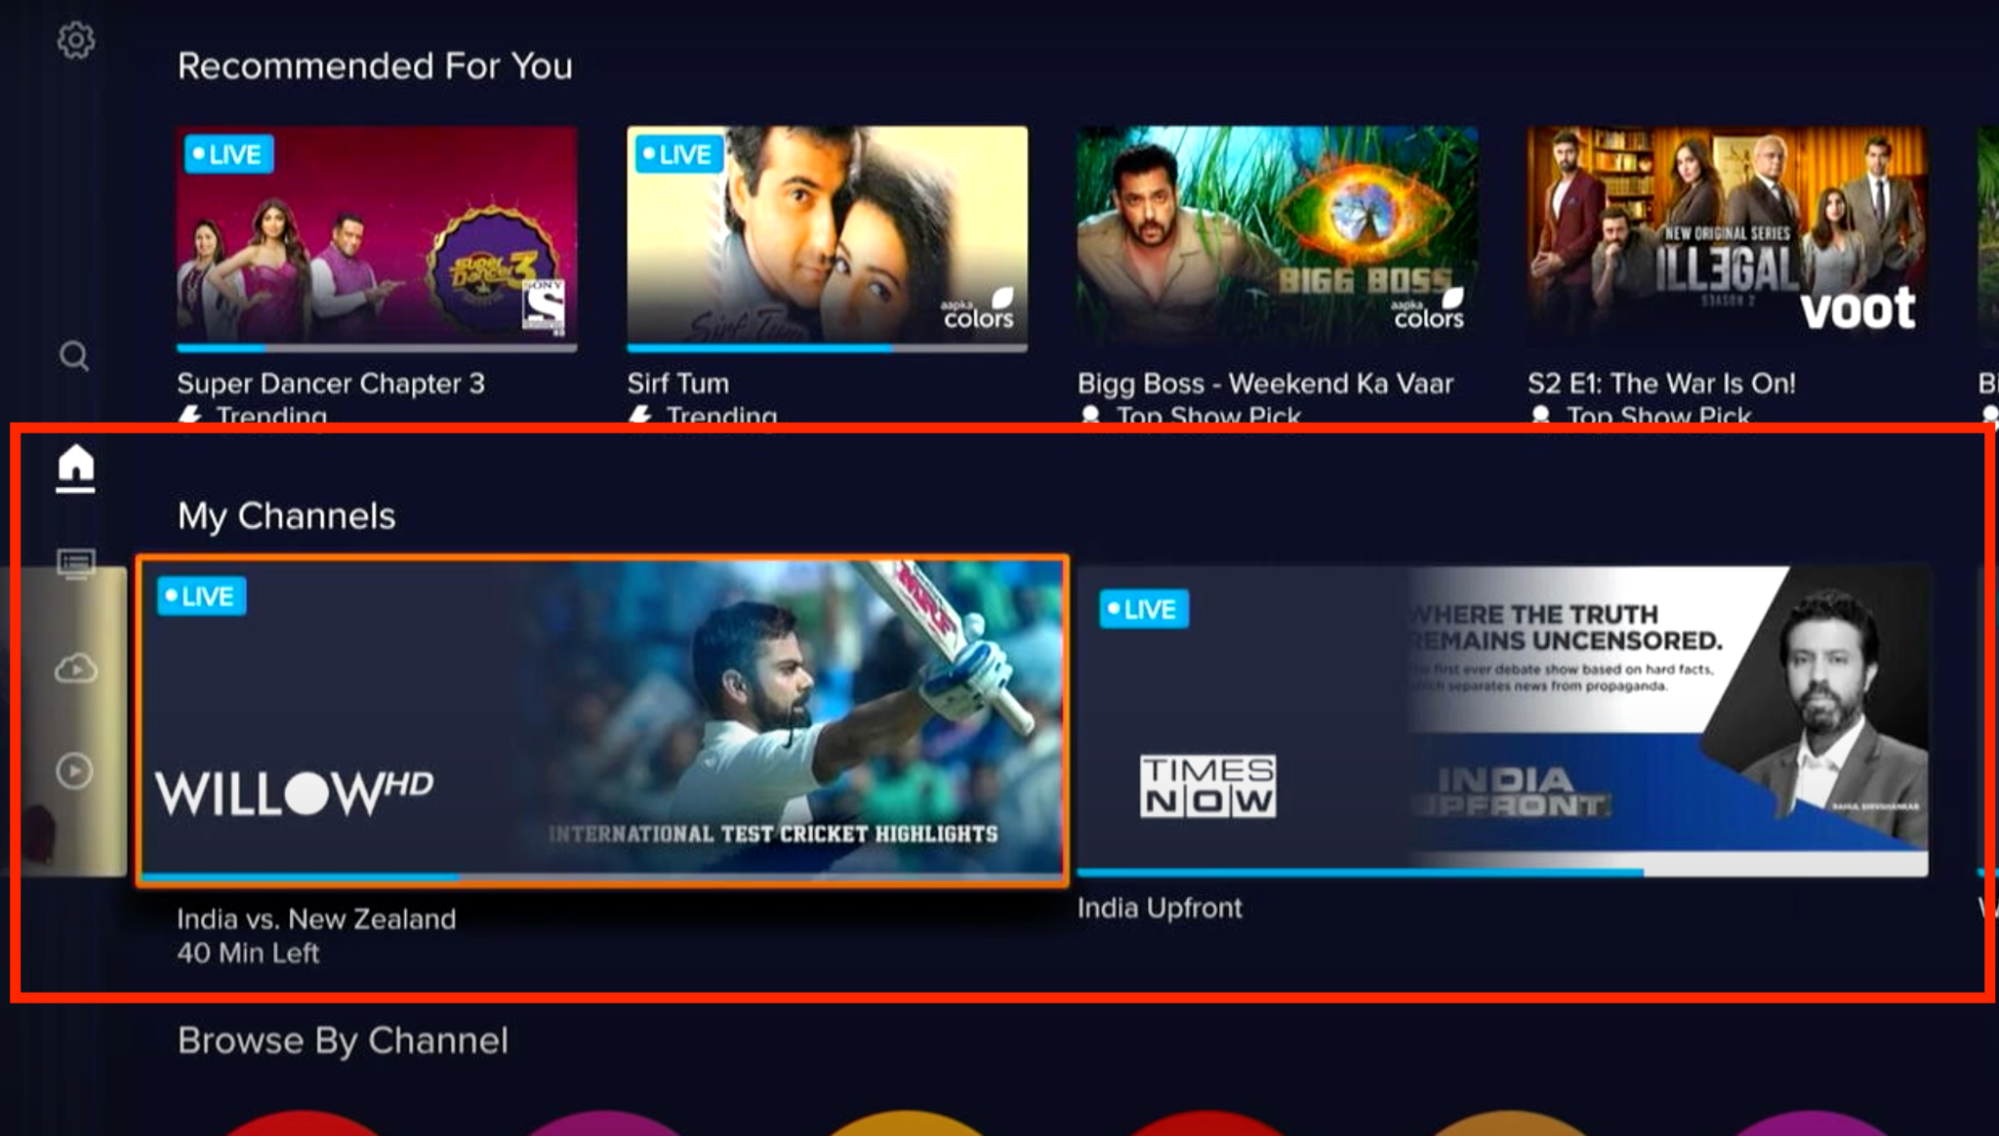 Easily Access Your Favorite Channels on Sling